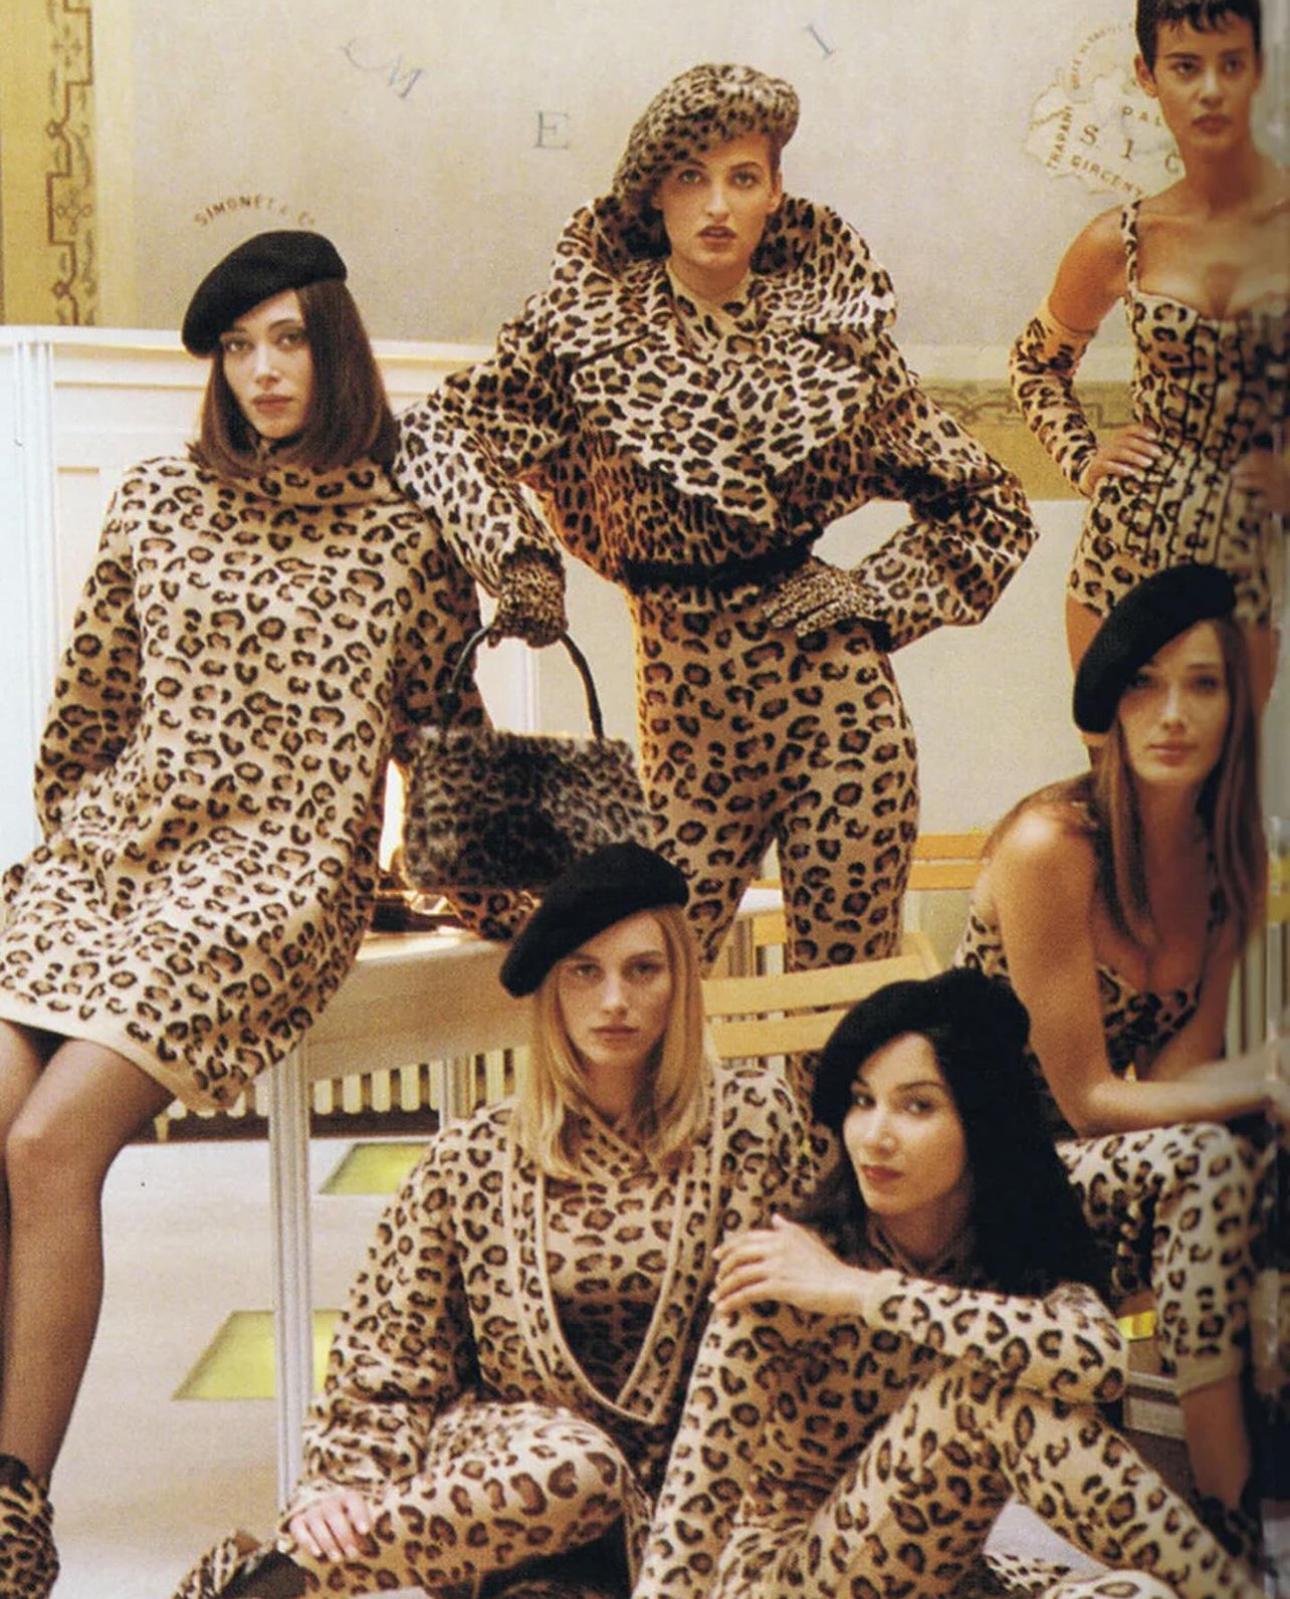 - Azzedine Alaïa archival iconic leopard wool two-piece set
- Sold by Skof.Archive 
- Fall-Winter 1991 
- Designed by Azzedine Alaïa
- Crafted from high-quality worsted wool, showcasing an allover leopard motif 
- Long-sleeve fitted body with